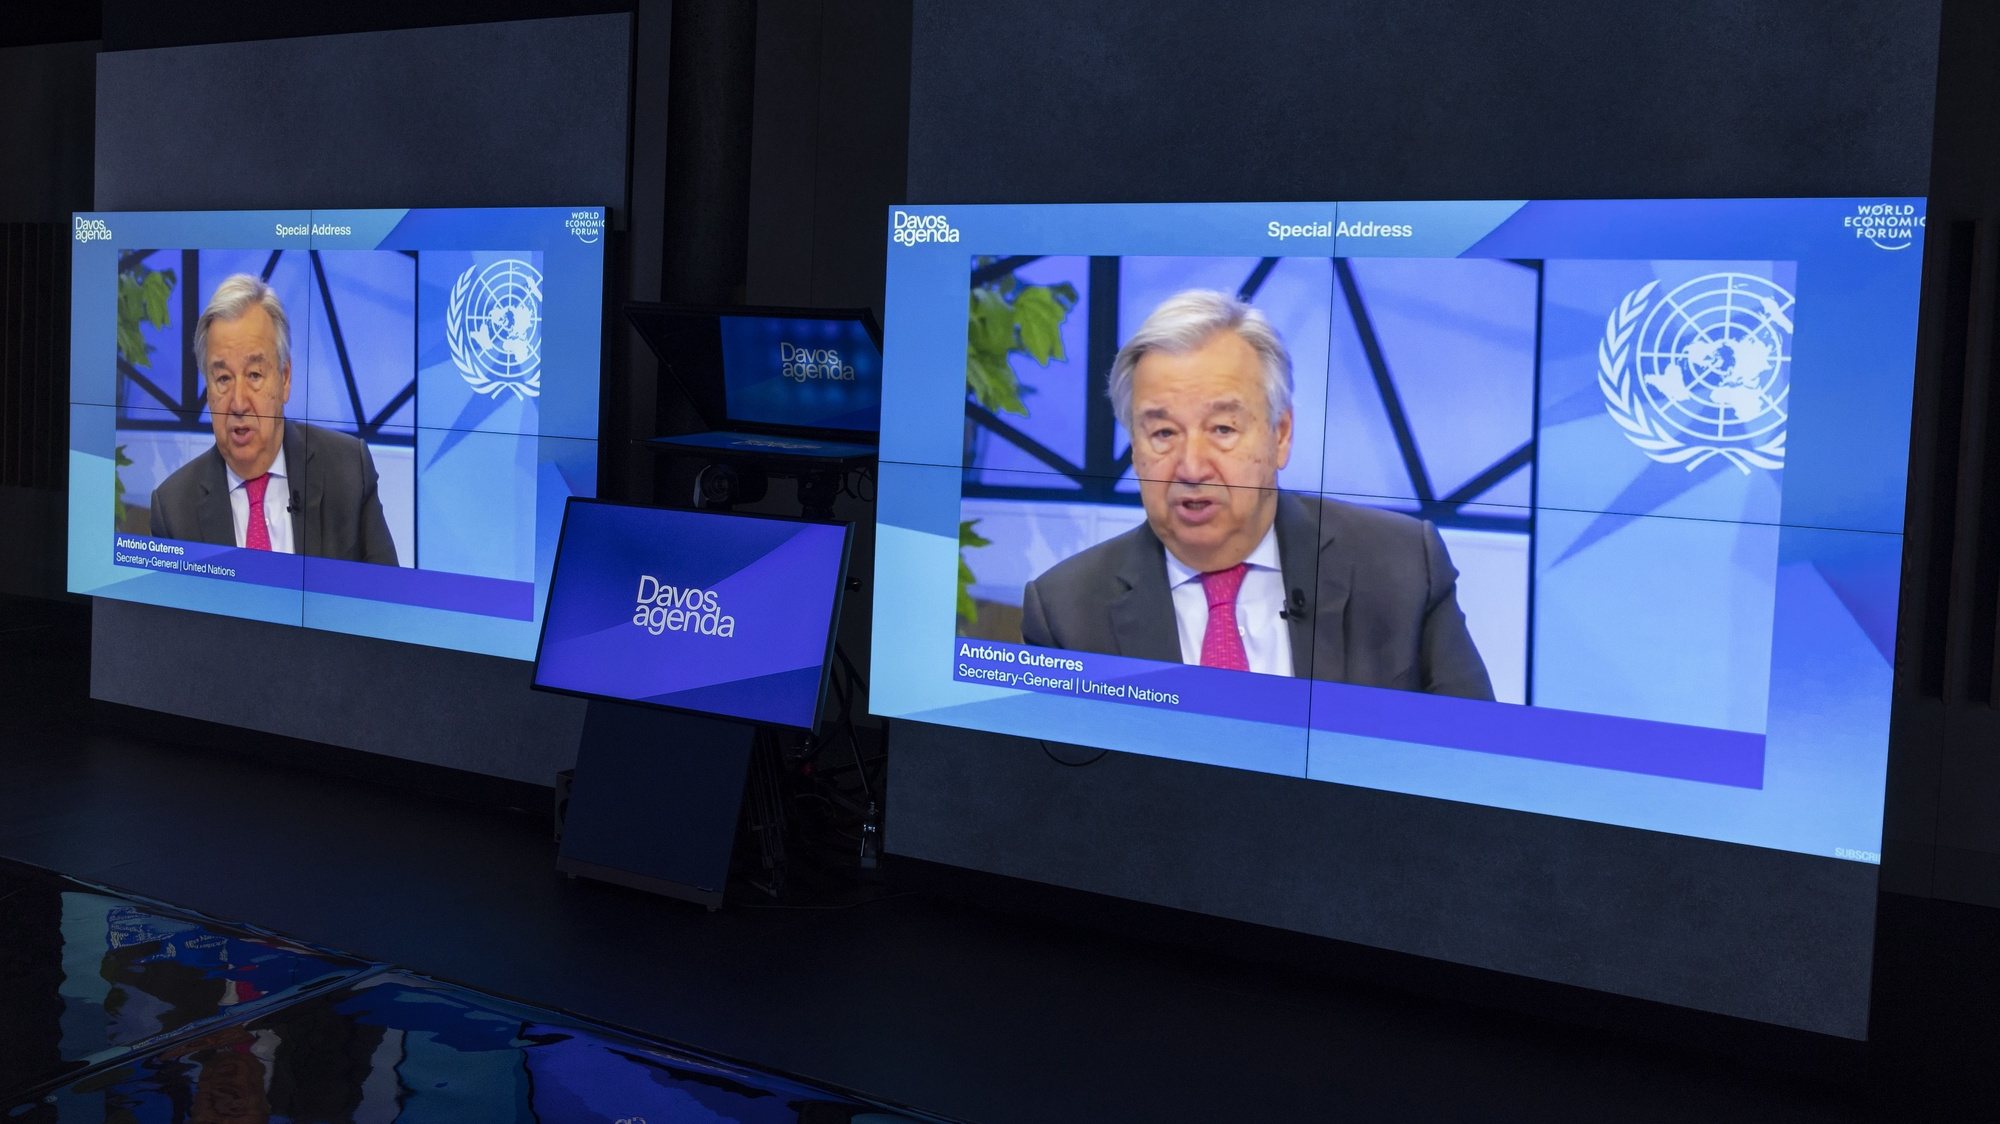 epa09691518 Screens show the U.N. Secretary-General Antonio Guterres delivering his statement during the Davos Agenda 2022, in Cologny near Geneva, Switzerland, 17 January 2022. The Davos Agenda 2022 will be hosted virtually due to the Coronavirus pandemic. Global leaders will gather through a series of virtual plenaries to shape the principles, policies and partnerships needed in this challenging context.  EPA/SALVATORE DI NOLFI